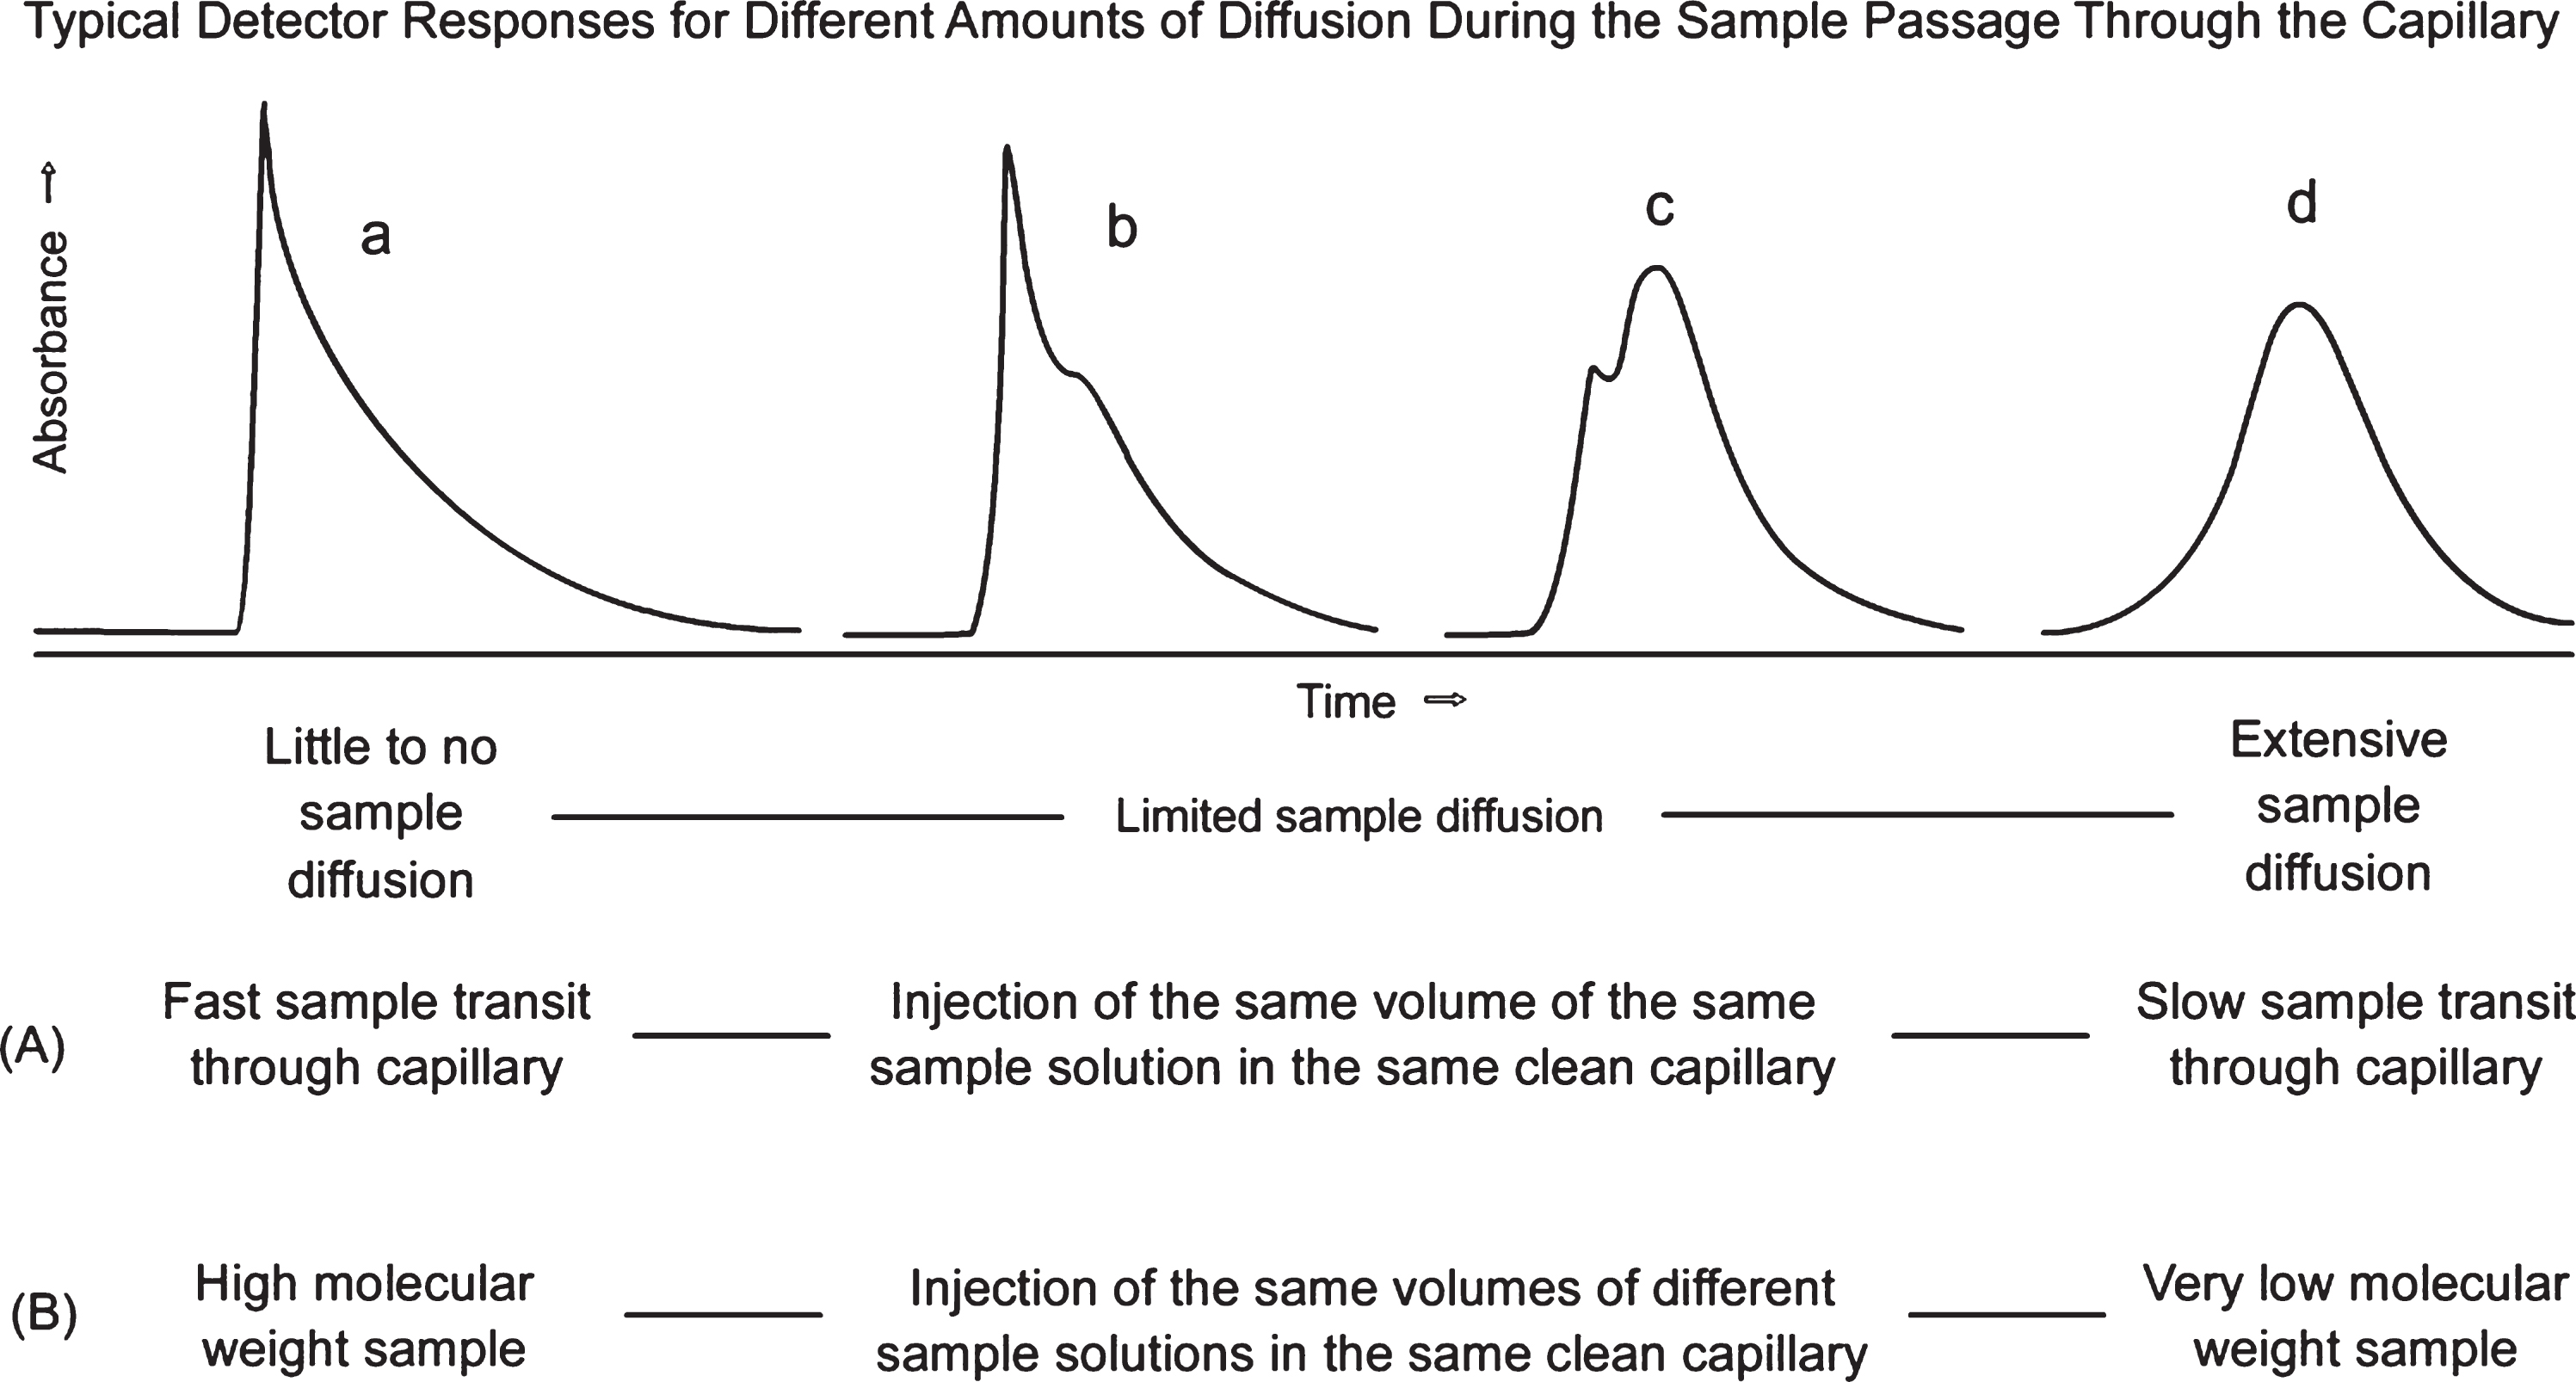 Eluting sample concentration versus time curves under different experimental circumstances: (A) effects of different mobile phase flow rates on resulting curve shapes for a single protein sample; (B) effects of sample molecule molecular weights reflected by different diffusion coefficients.